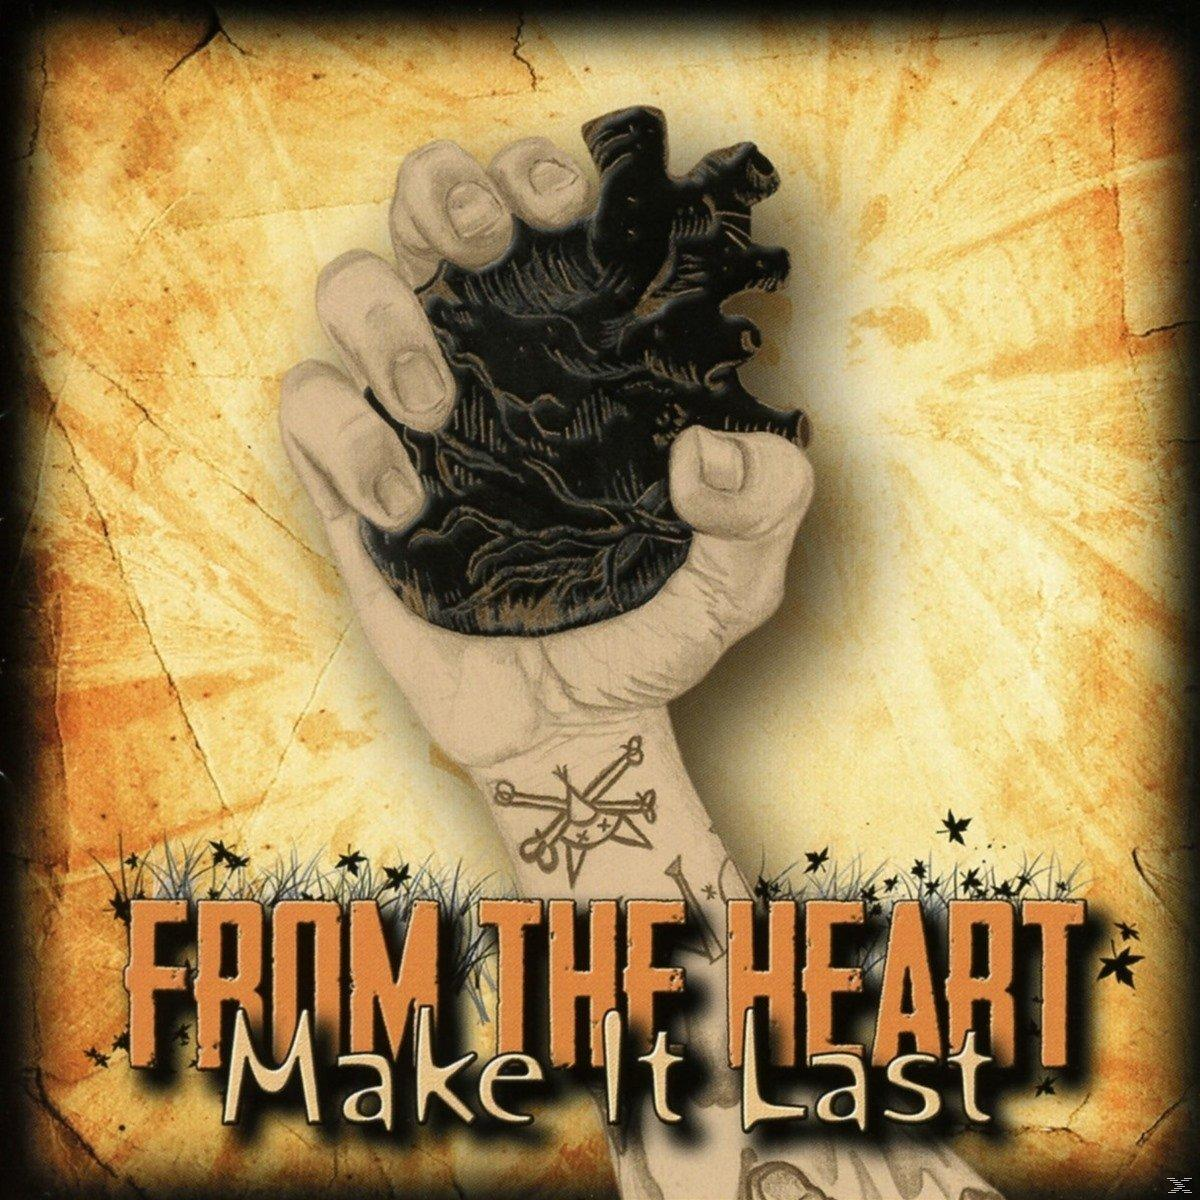 It Heart - Last Make (CD) From - The